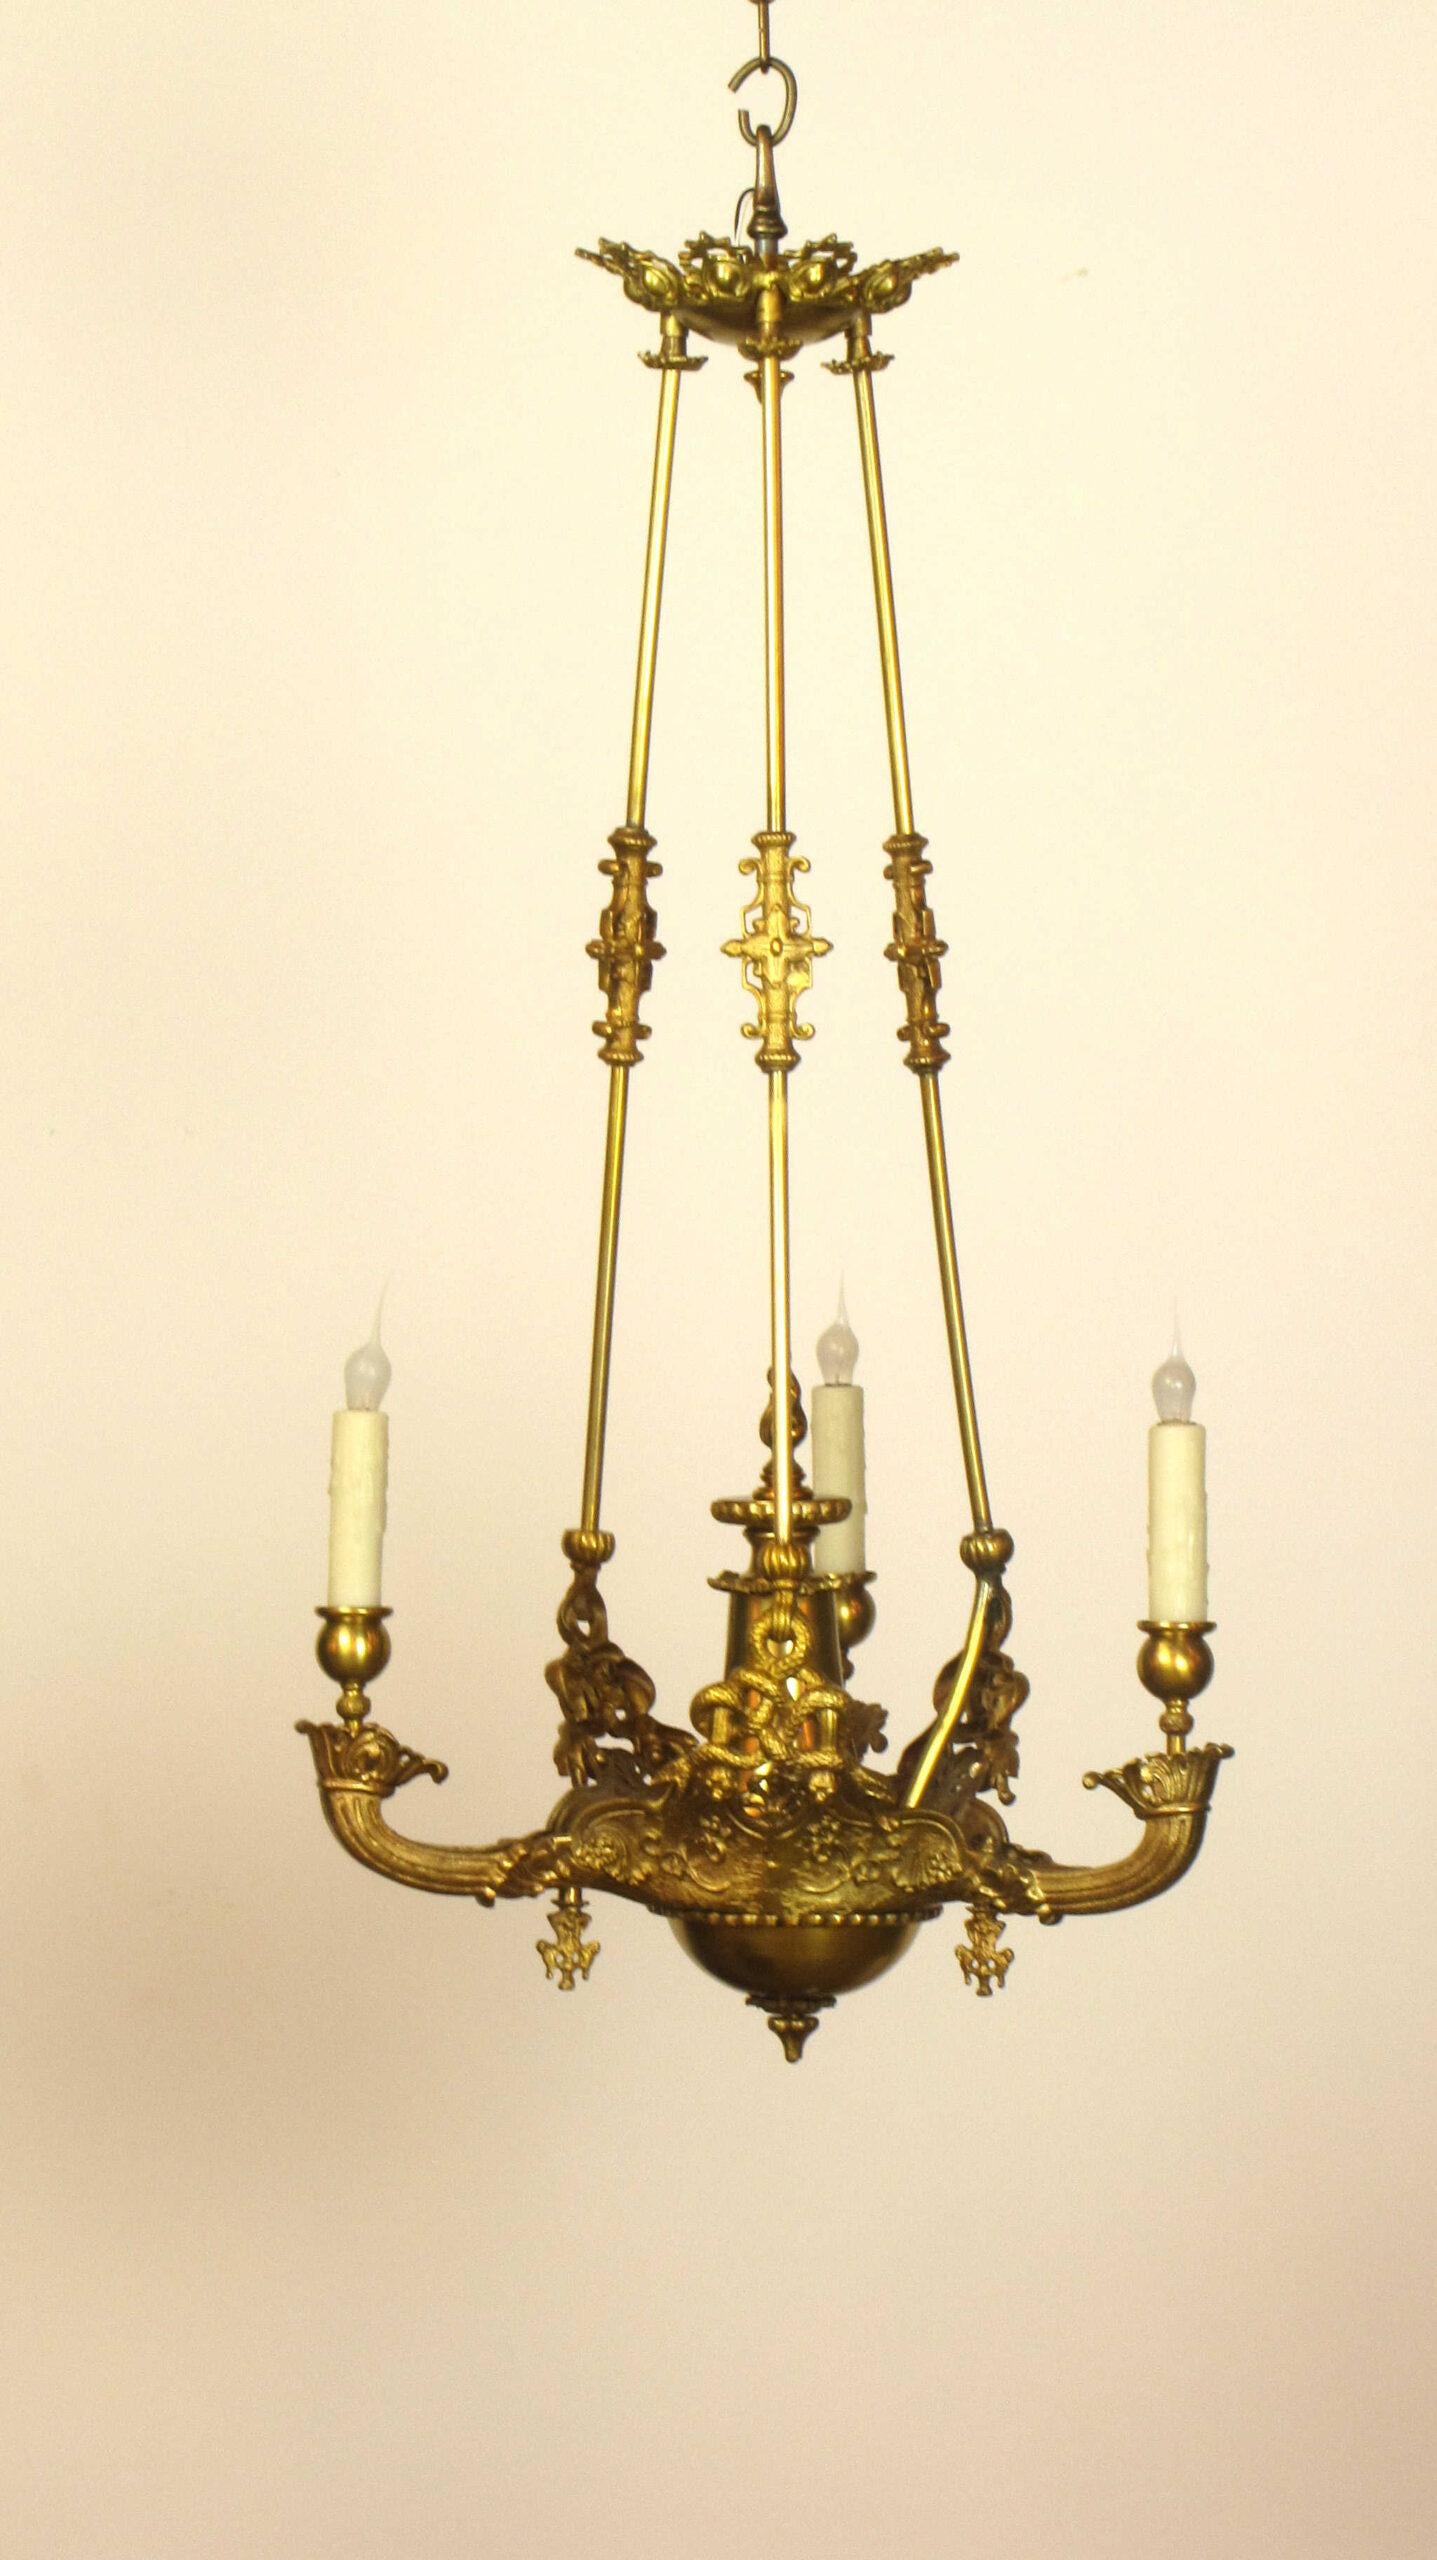 Three Light Early Gas Chandelier Attributed to Cornelius and Baker In Good Condition For Sale In Canton, MA